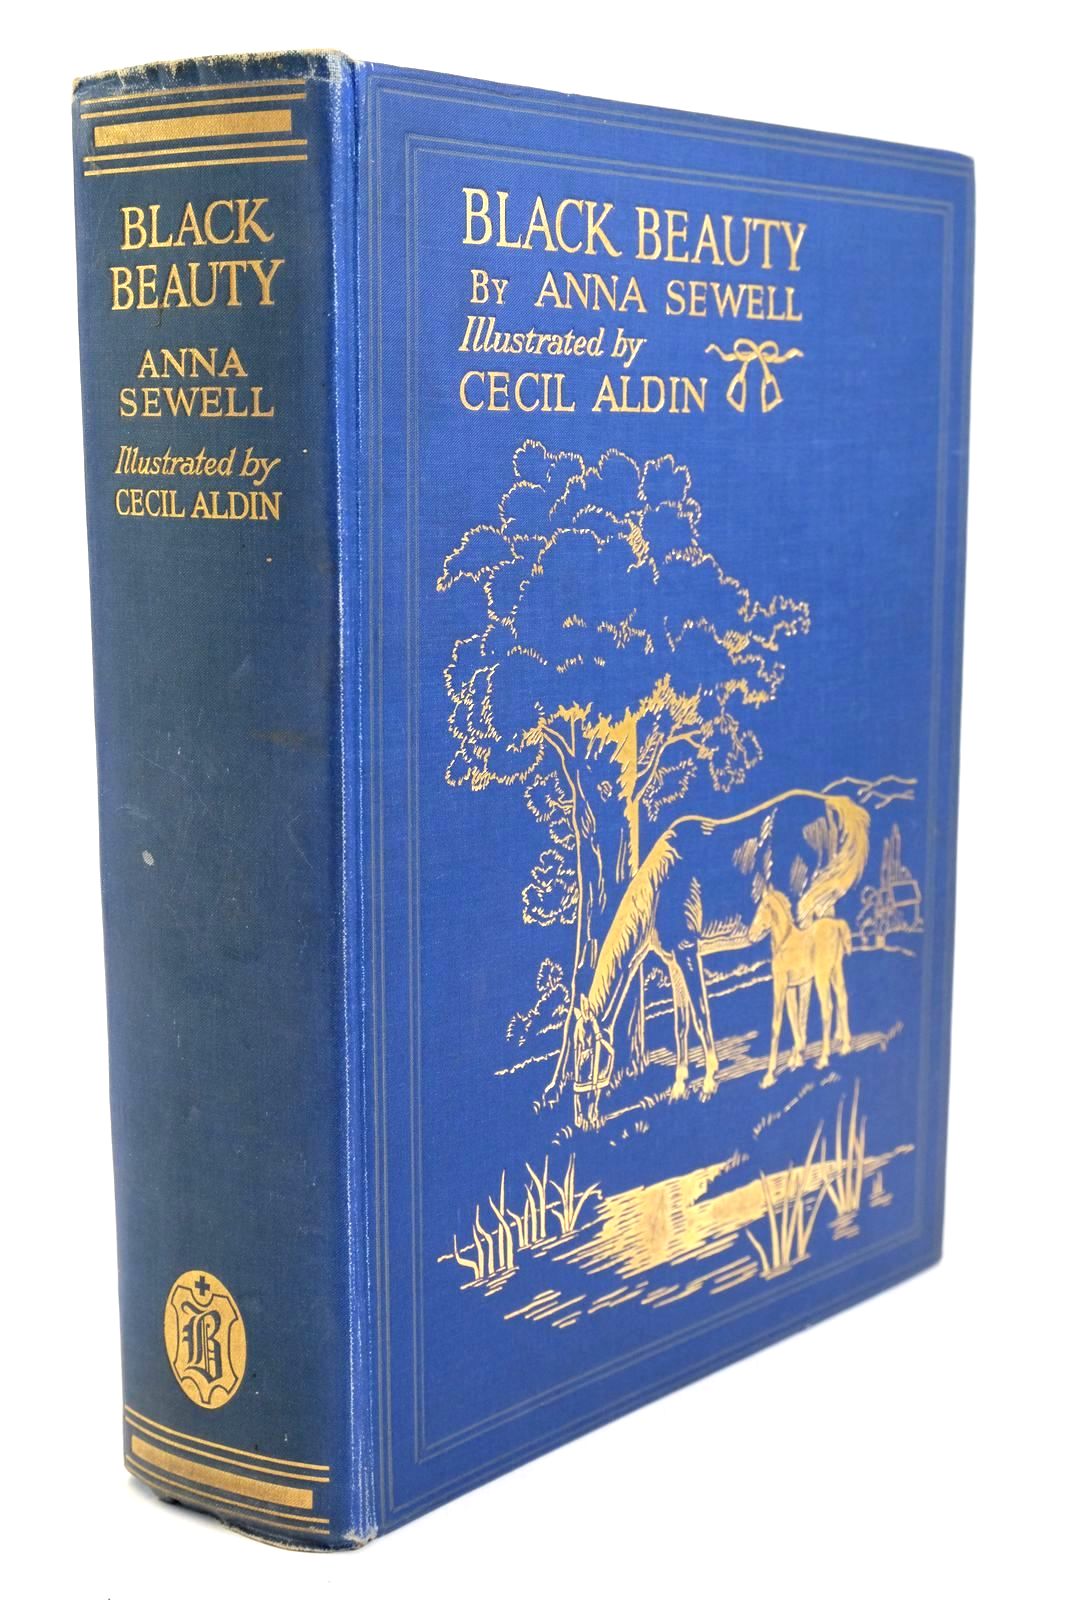 Photo of BLACK BEAUTY written by Sewell, Anna illustrated by Aldin, Cecil published by Jarrolds, Boots the Chemists (STOCK CODE: 1321401)  for sale by Stella & Rose's Books